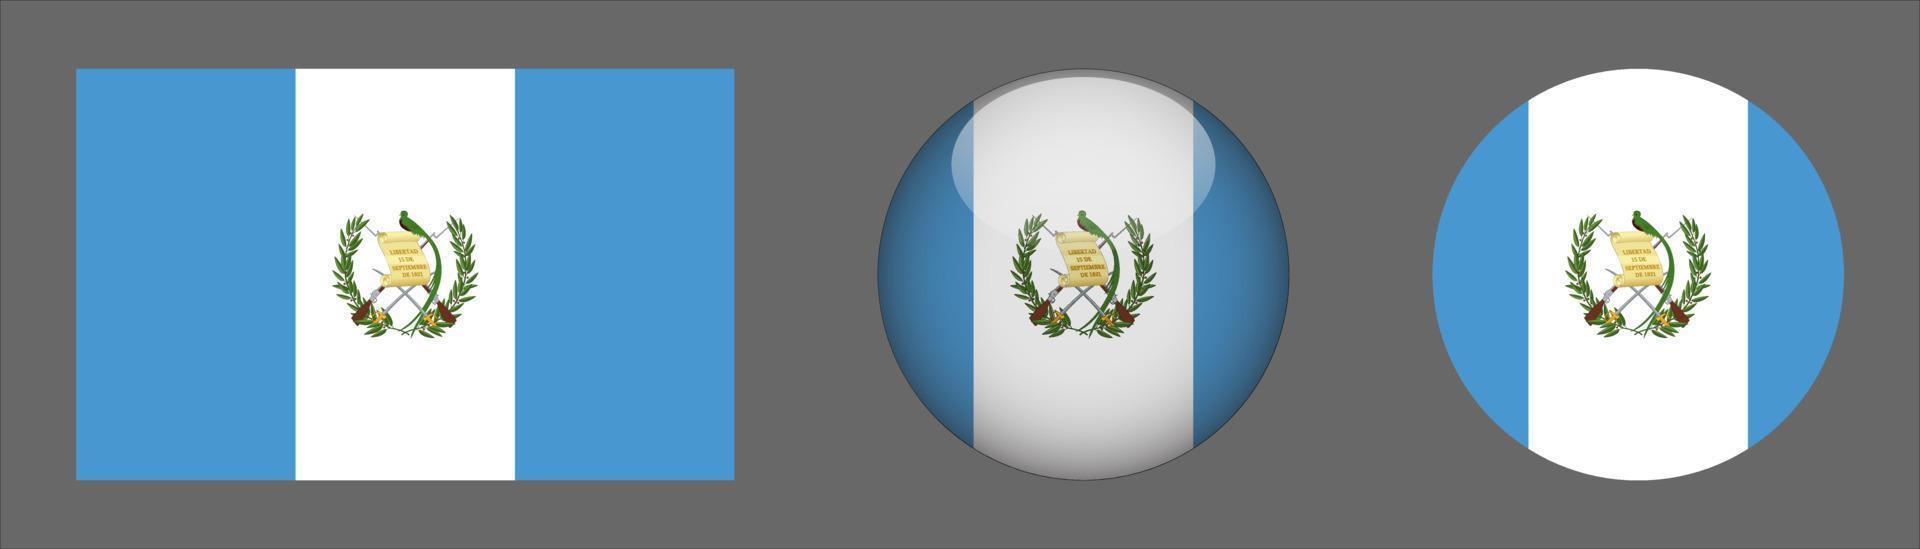 Guatemala Flag Set Collection, Original Size Ratio, 3d Rounded and Flat Rounded vector